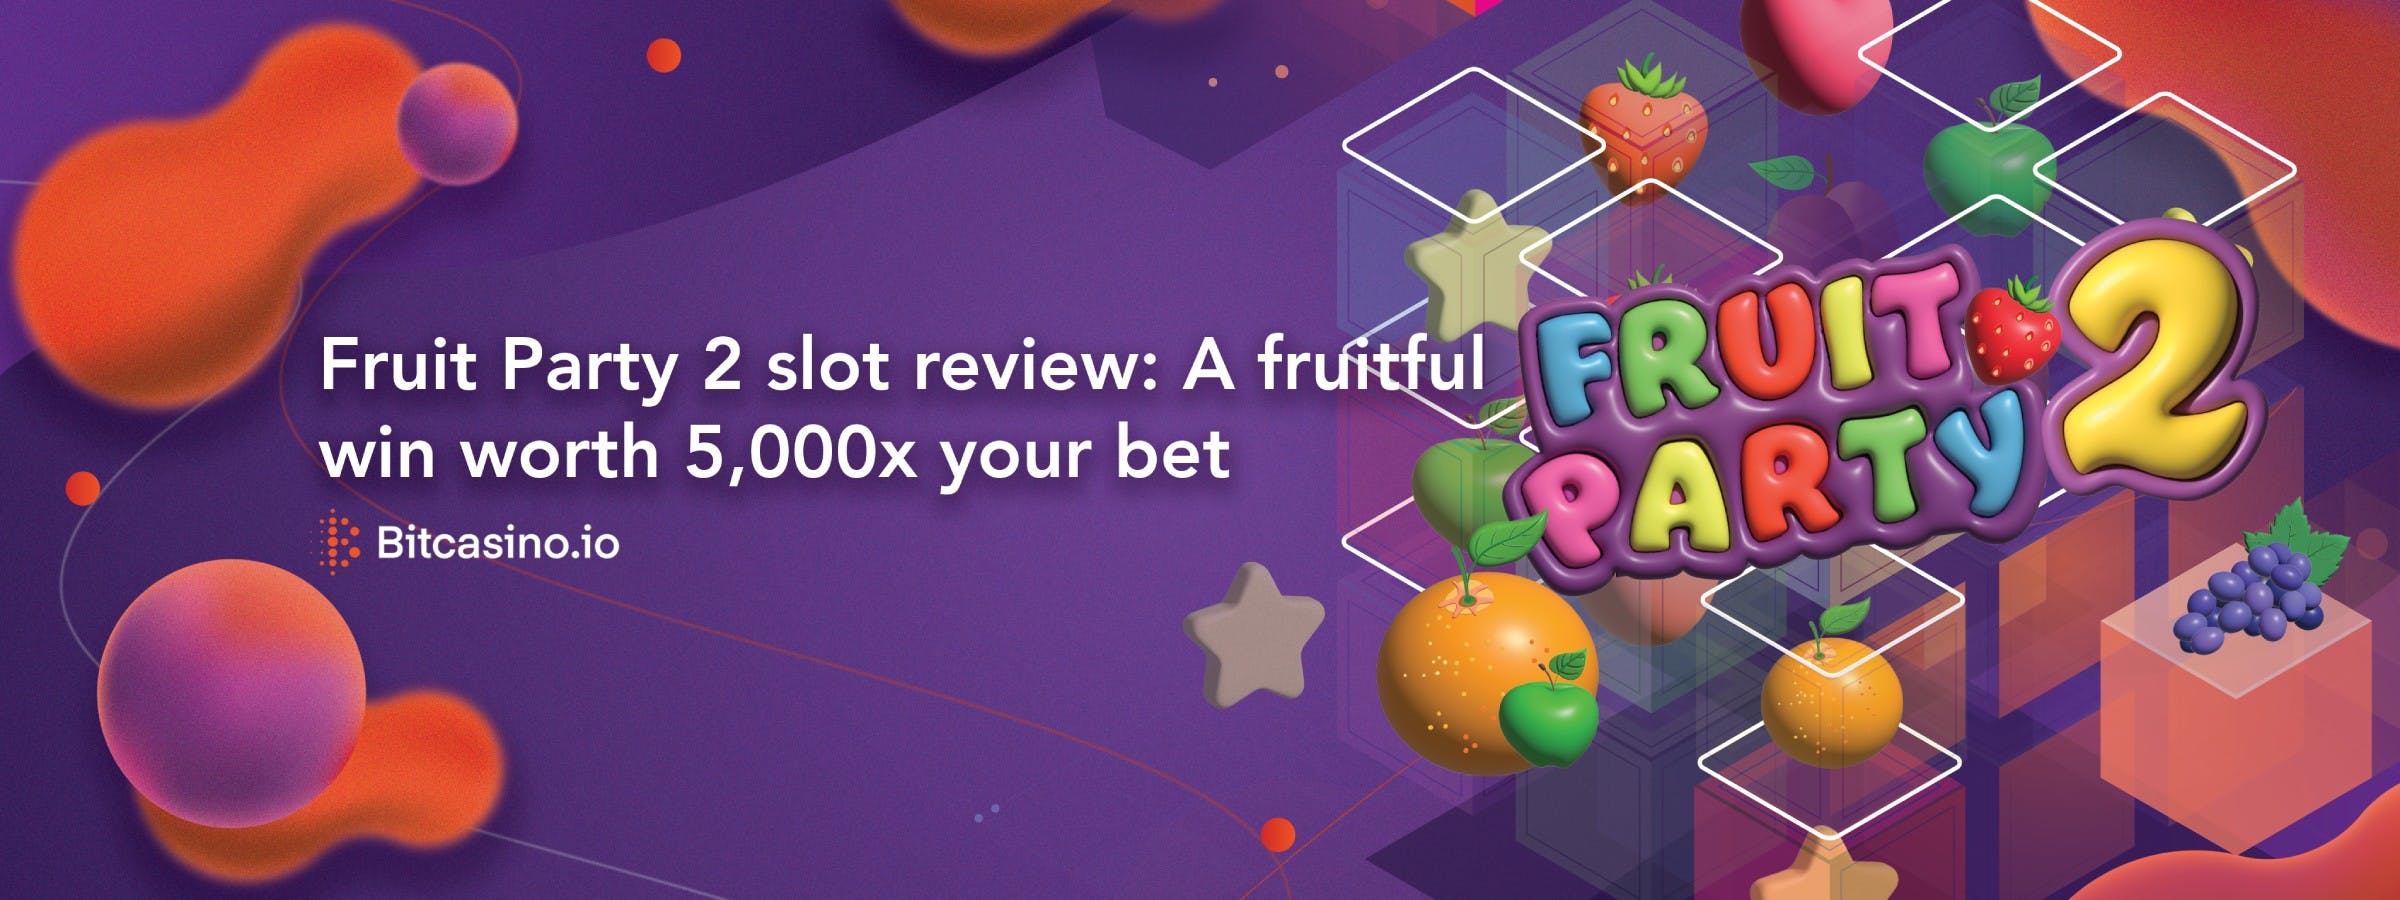 Fruit Party 2 slot review: A fruitful win worth 5,000x your bet